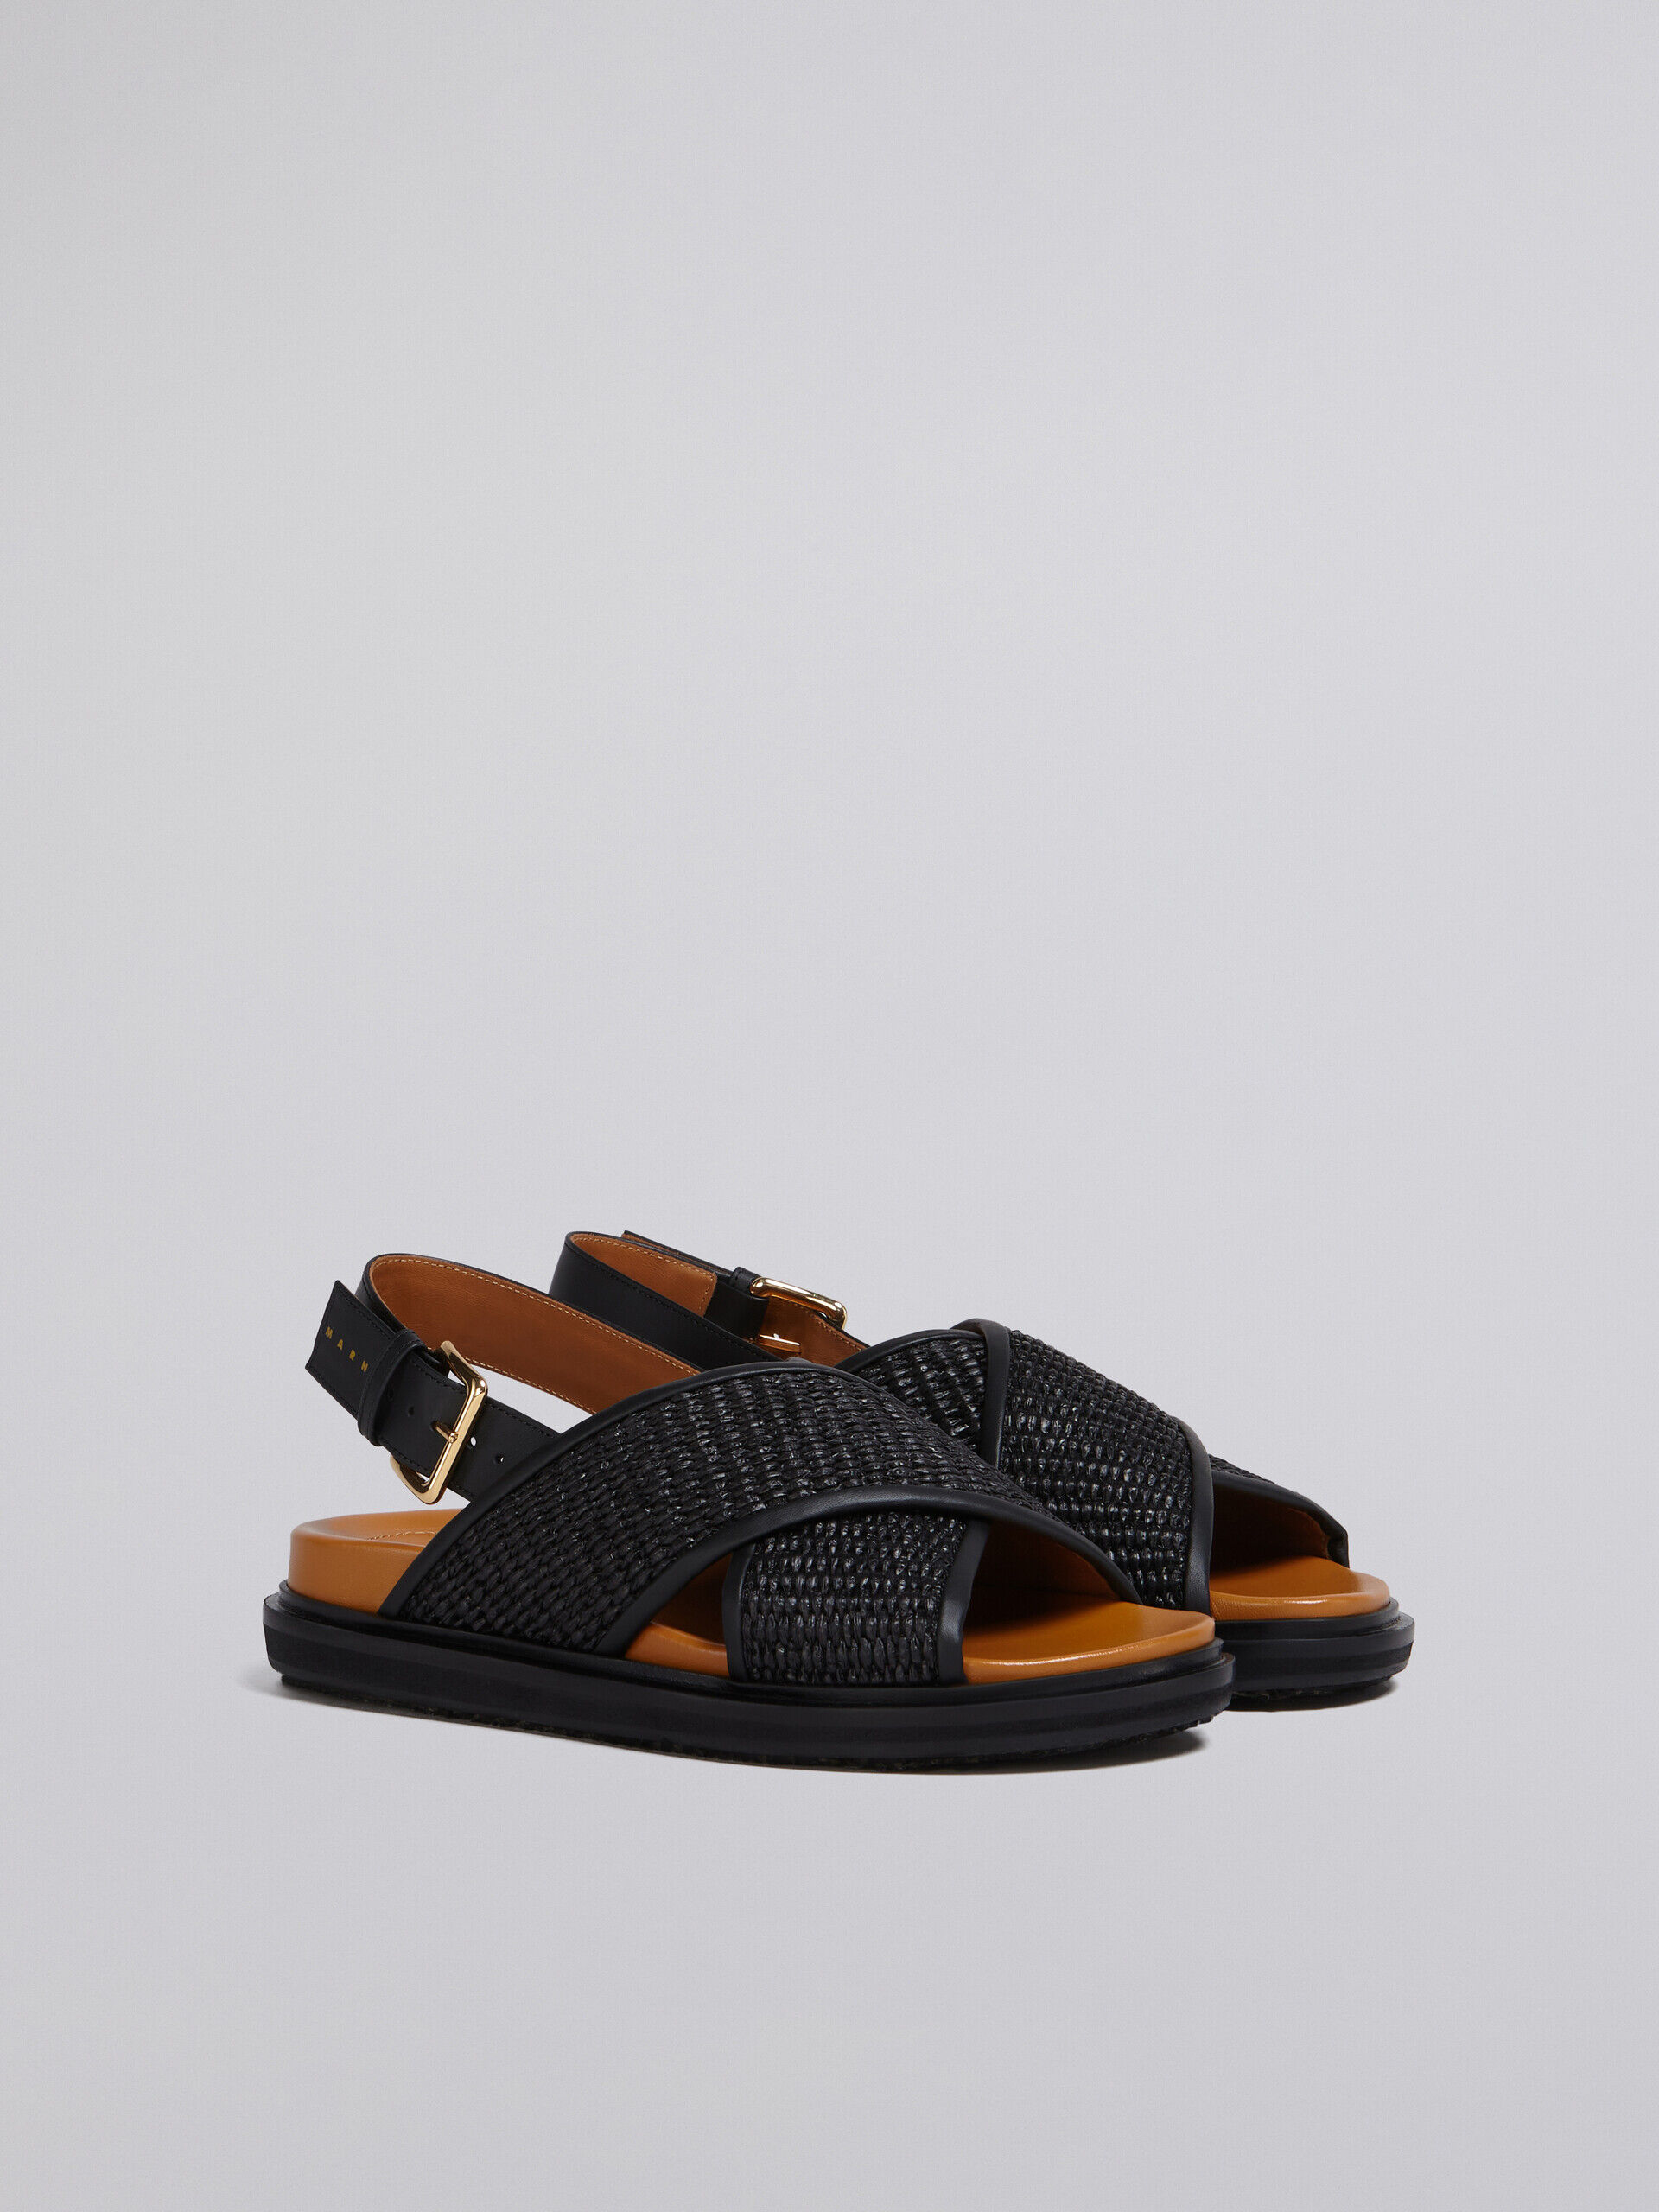 Fussbet sandals in black leather and raffia-effect fabric | Marni